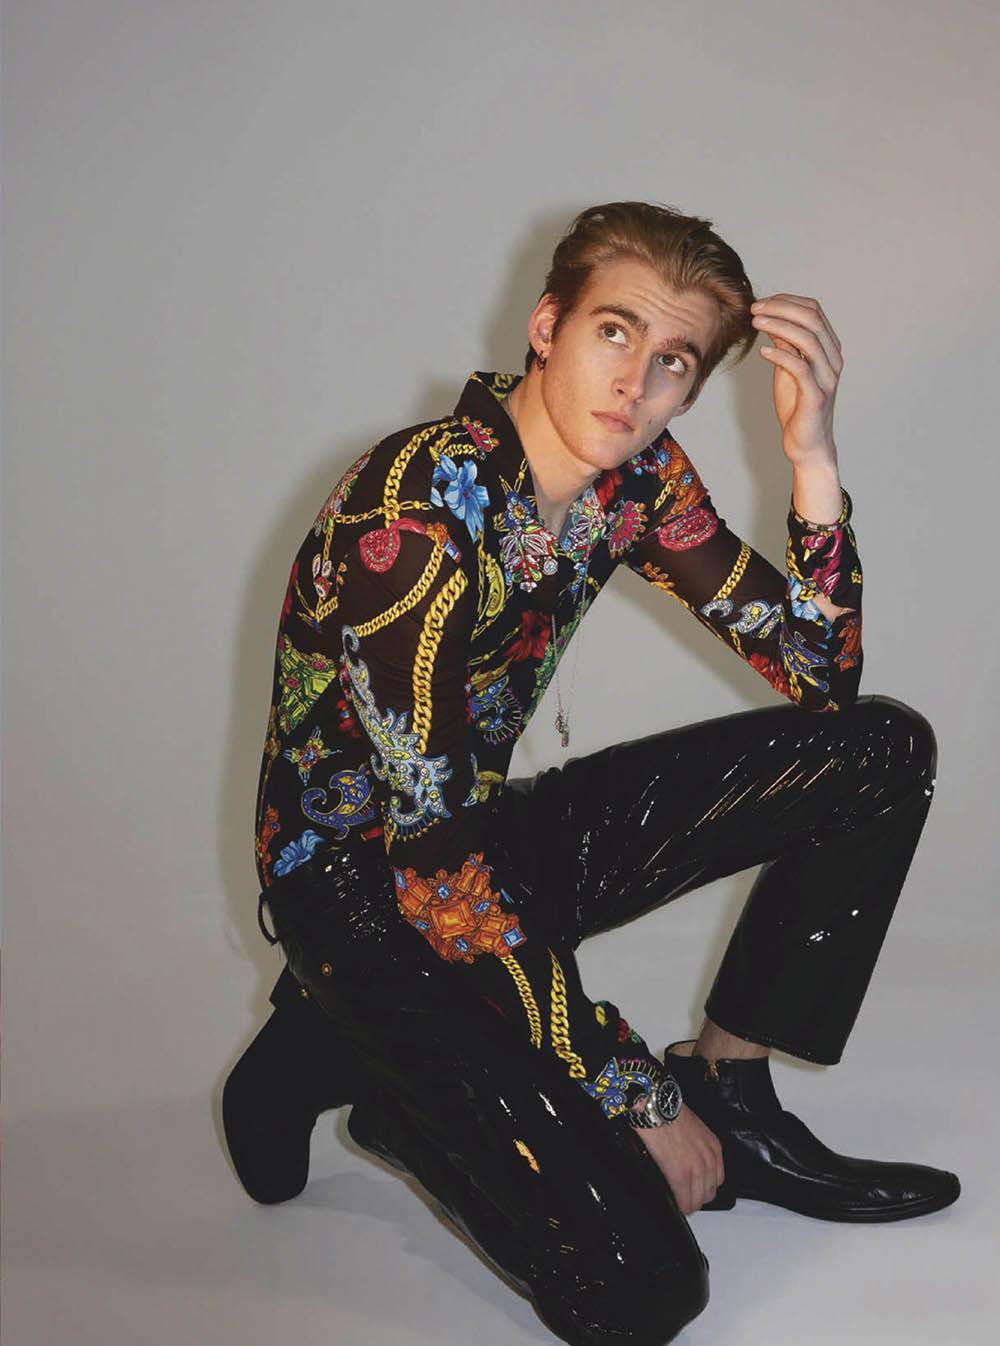 Presley Gerber covers GQ Style Mexico Spring Summer 2019 by Ben Lamberty